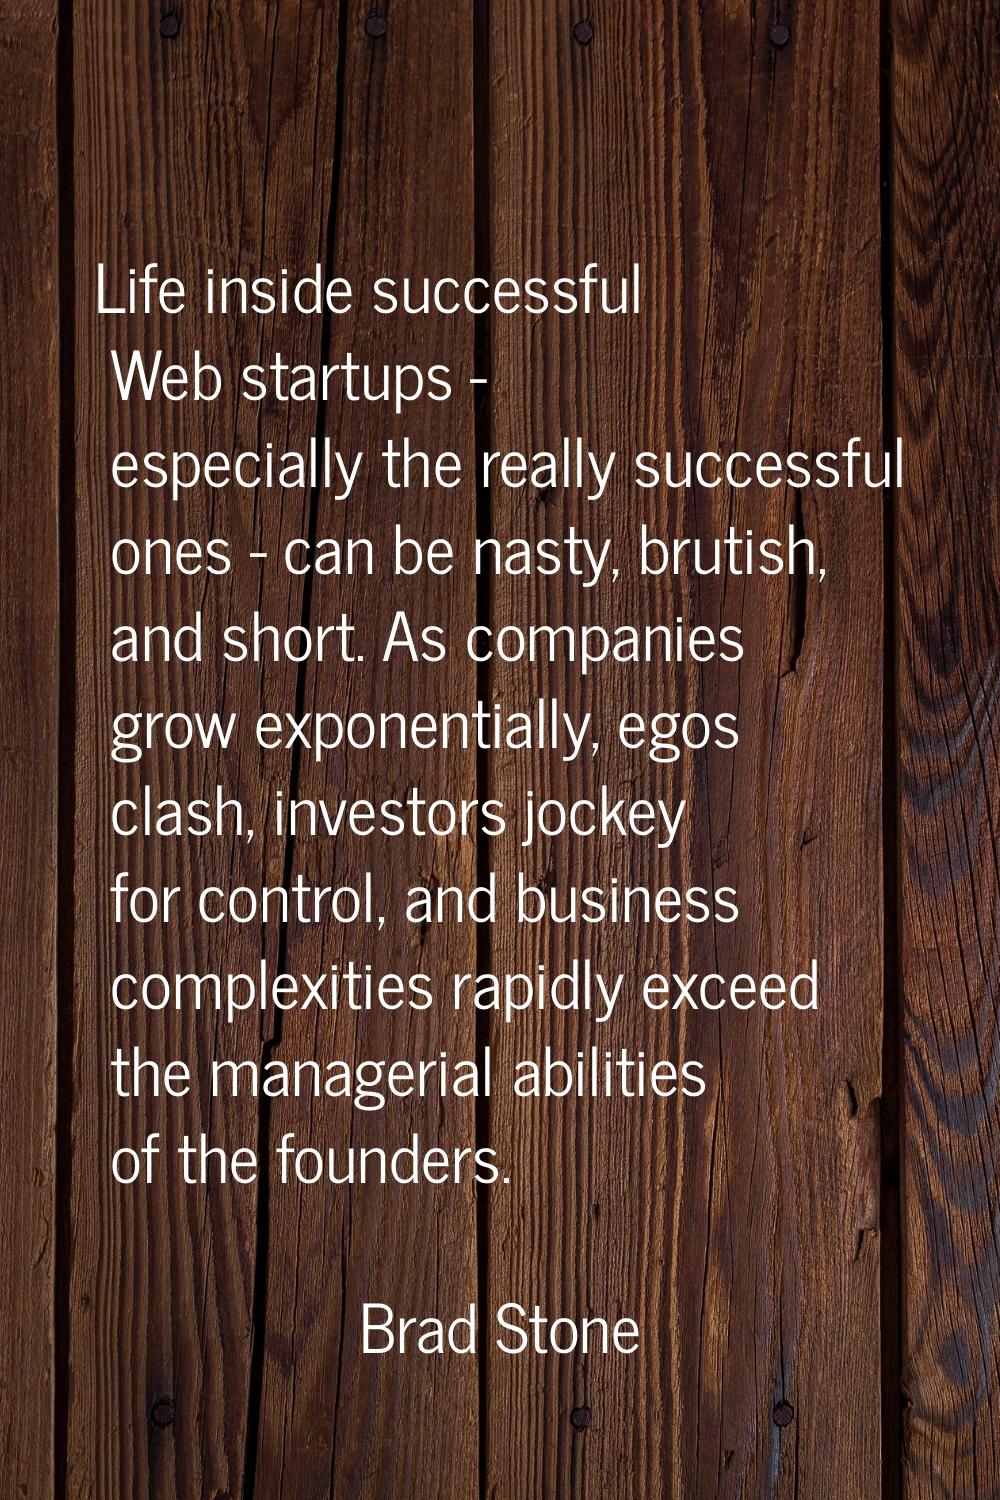 Life inside successful Web startups - especially the really successful ones - can be nasty, brutish